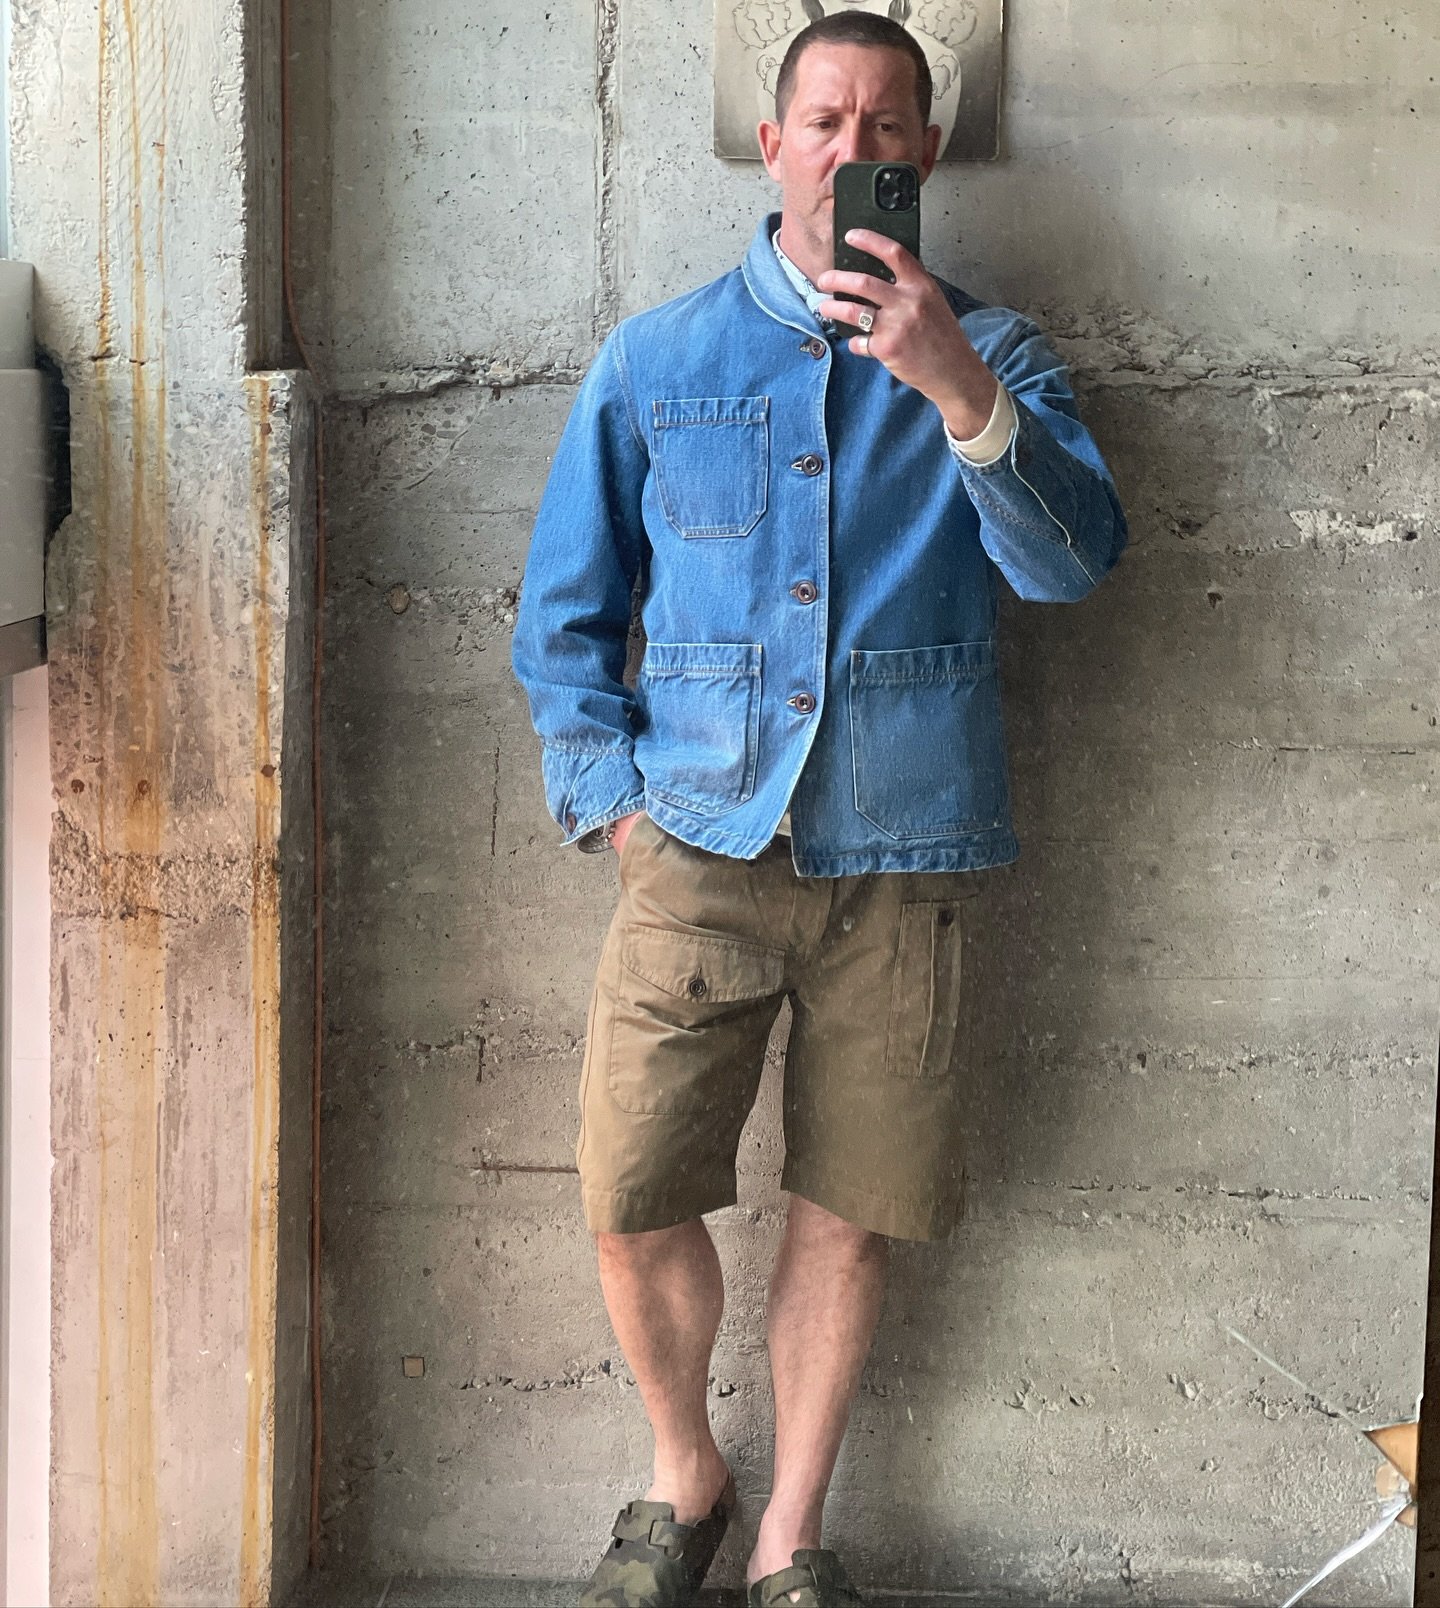 Warm enough for shorts, cool enough for a bit of denim. 
Wear testing our soon to be released into the Limited to 100 💙 collection US Navy Shawl Collar Coverall
With our Battle Dress Pocket Gurkha Shorts which are currently available on 20% off size